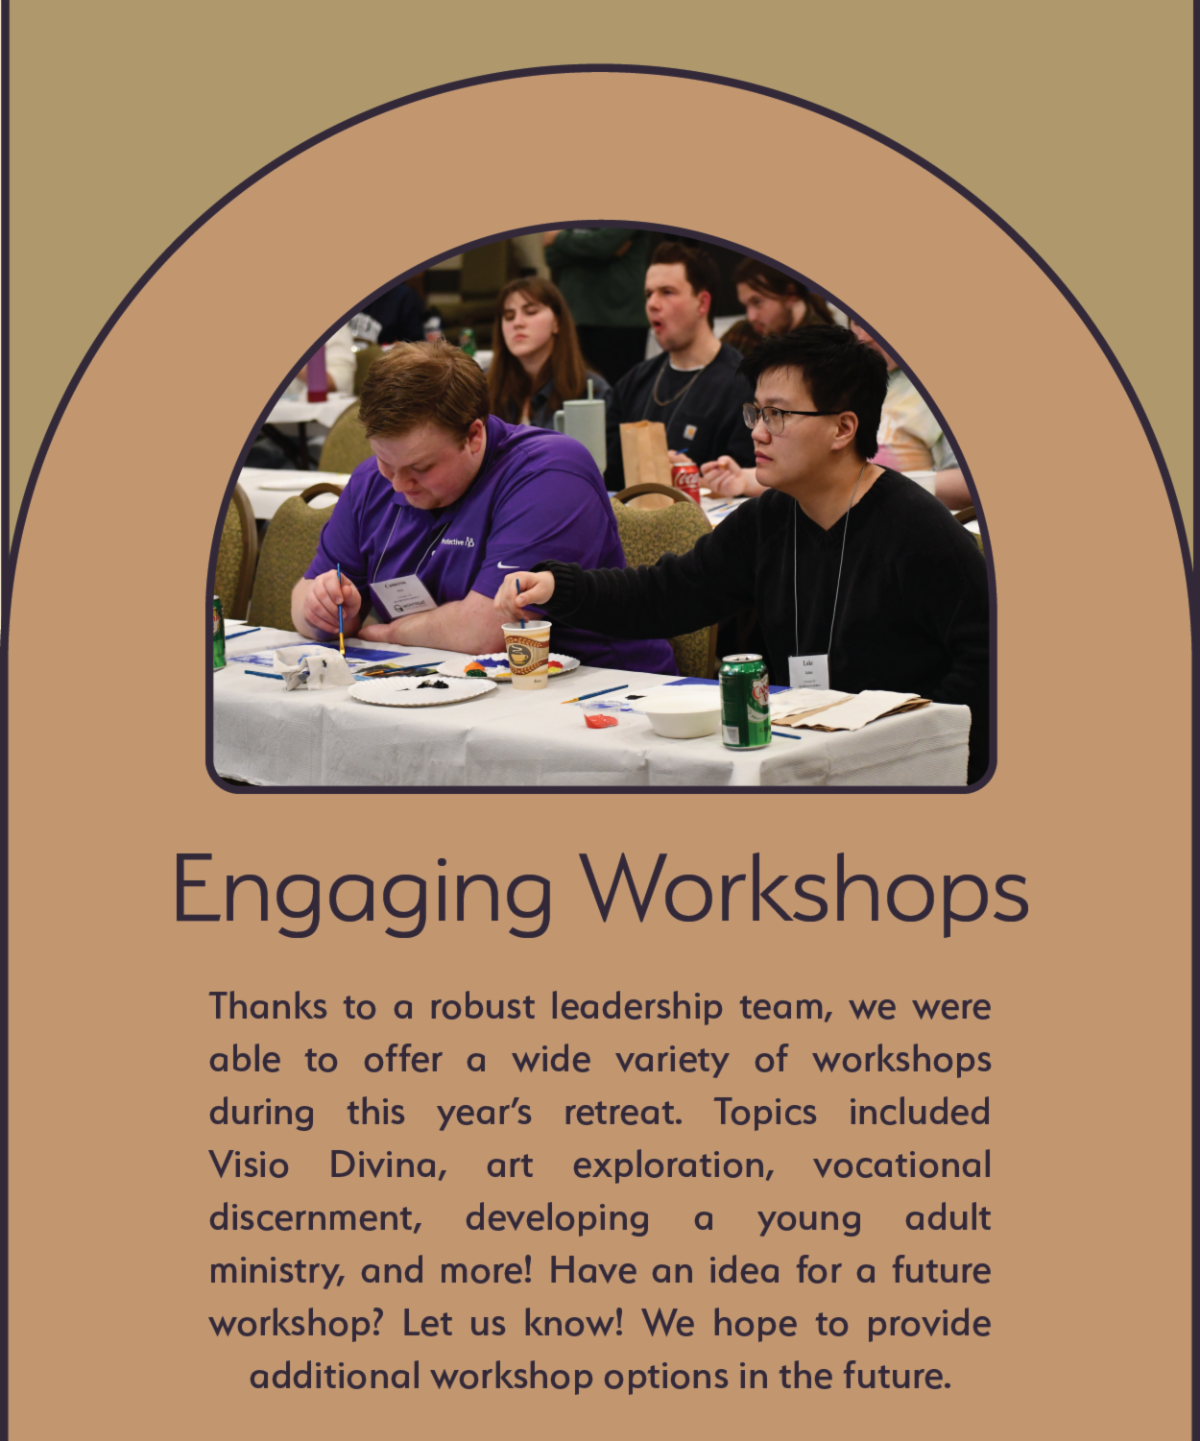 Engaging Workshops - Thanks to a robust leadership team, we were able to offer a wide variety of workshops during this year’s retreat. Topics included Visio Divina, art exploration, vocational discernment, developing a young adult ministry, and more! Have an idea for a future workshop? Let us know! We hope to provide additional workshop options in the future.